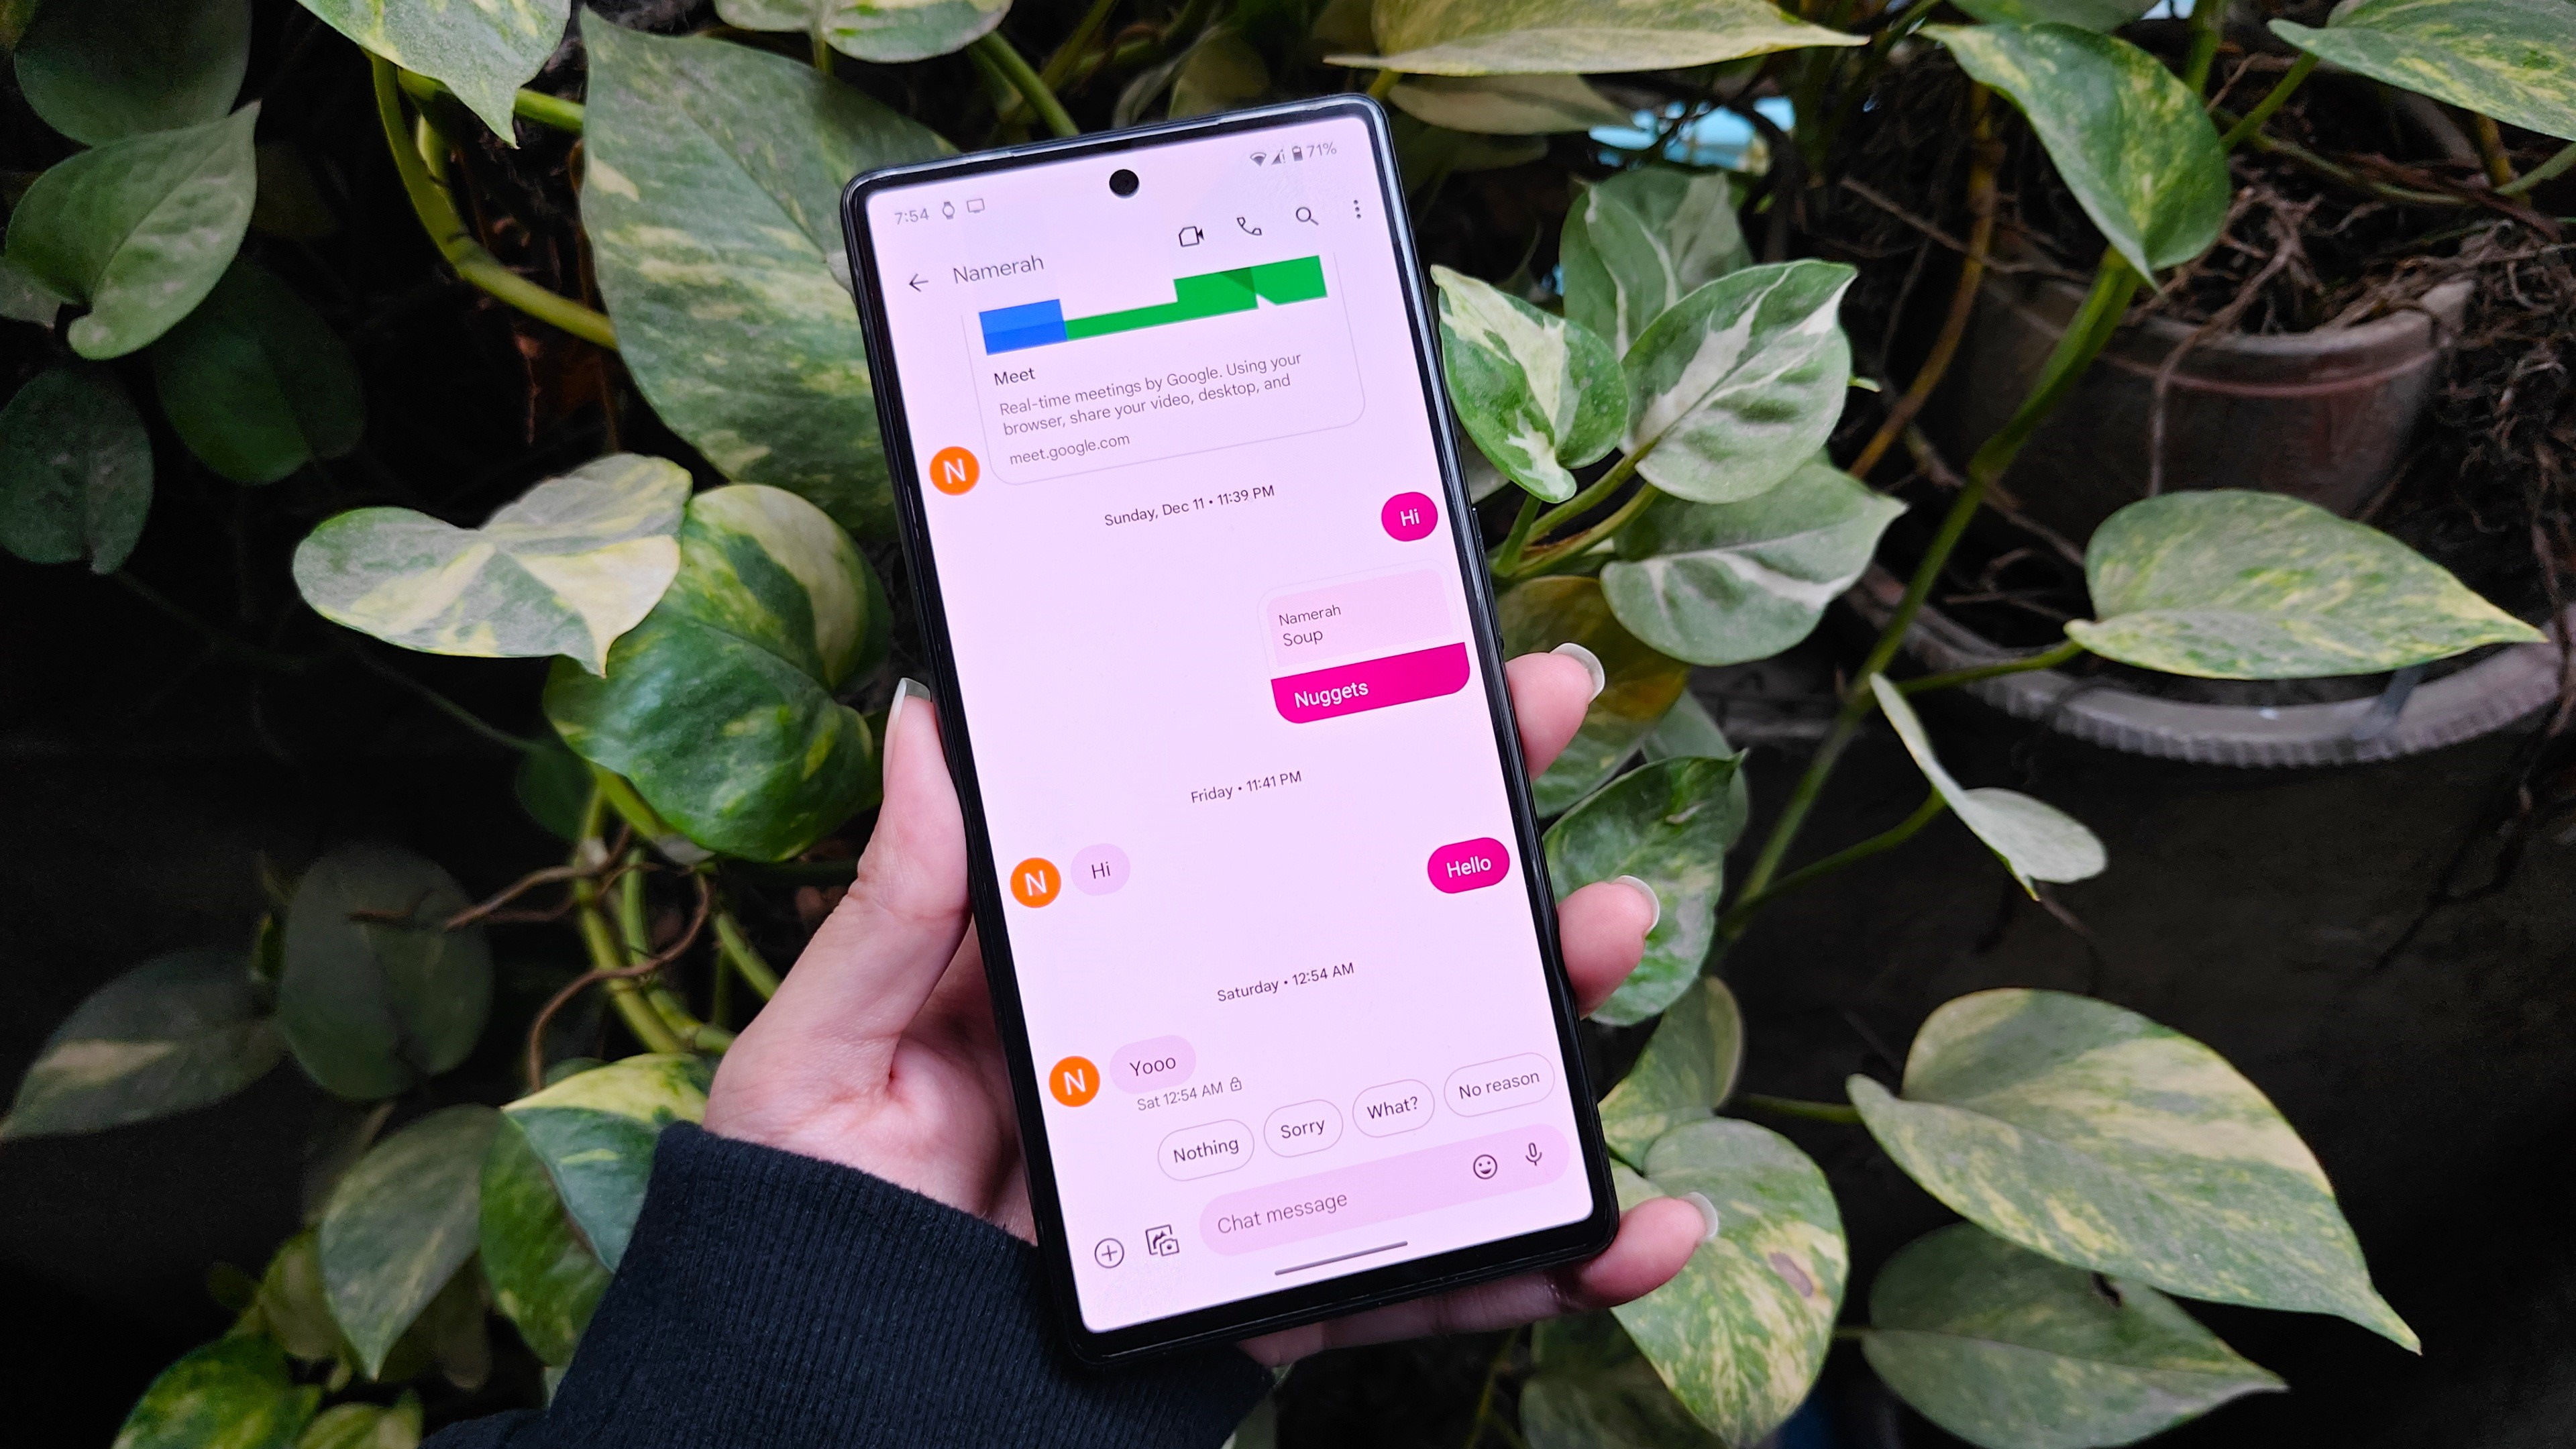 Google Messages RCS Chat features on a Pixel 6